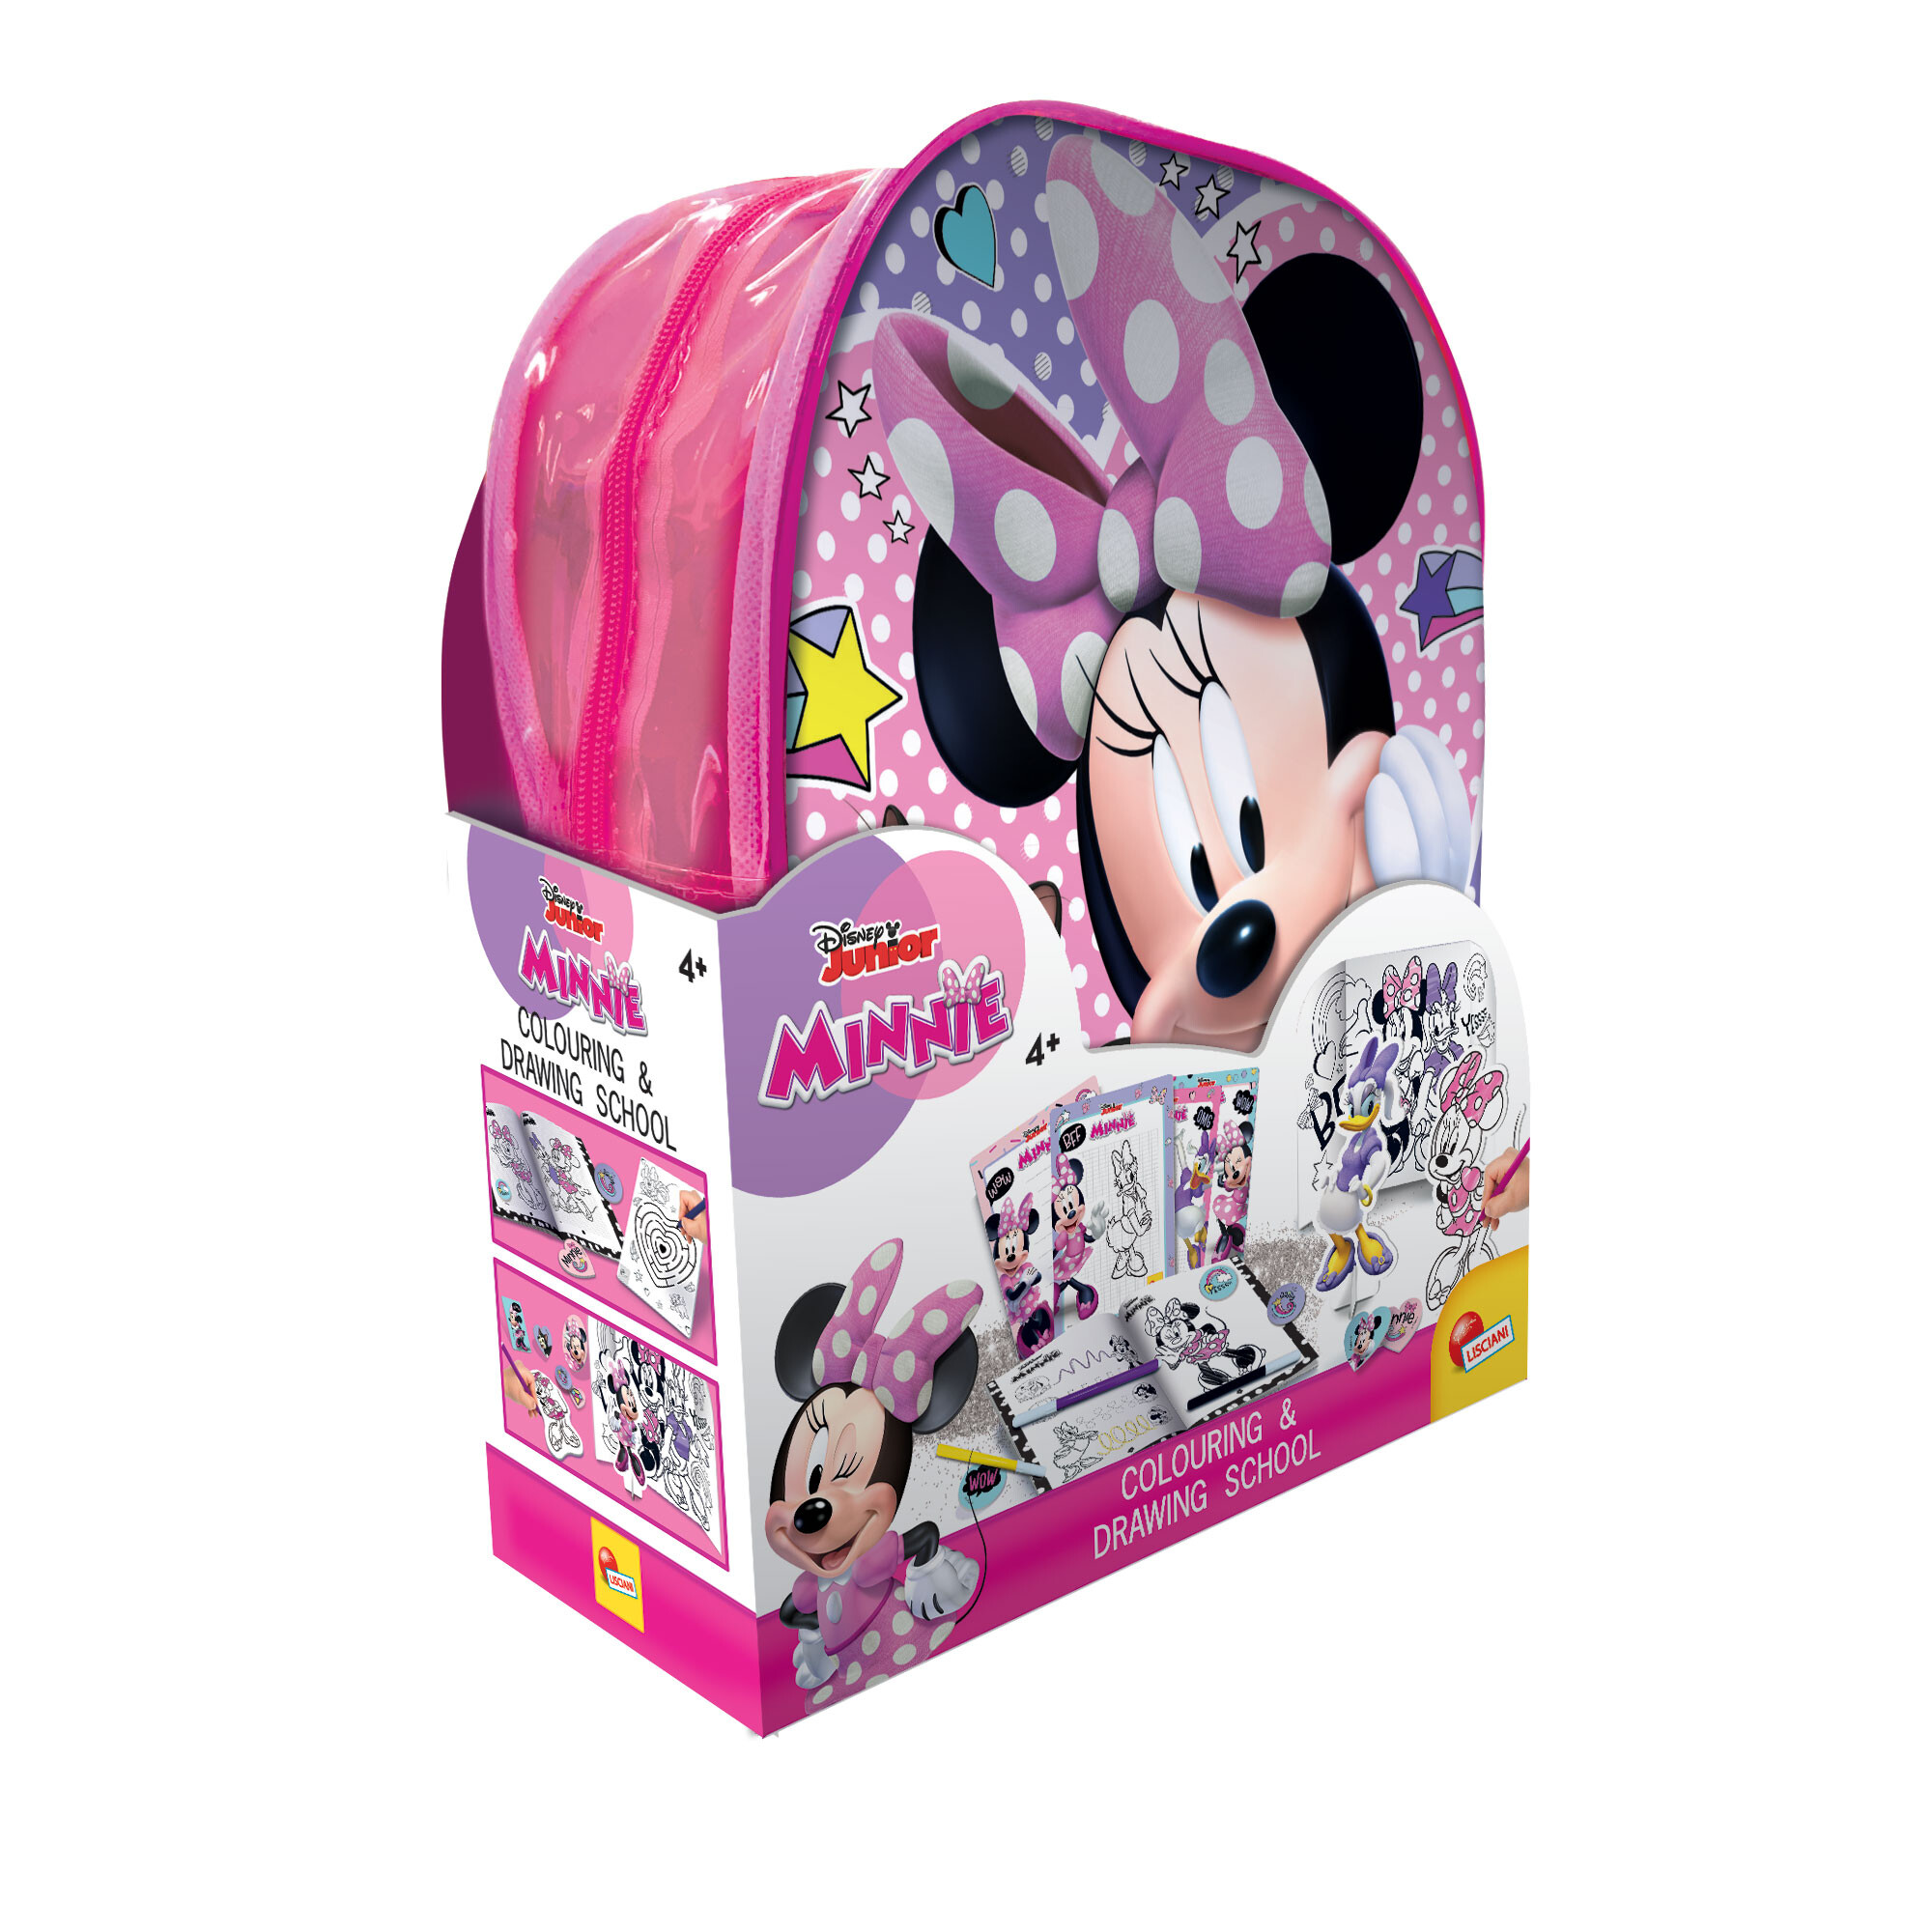 Minnie zainetto coloring and drawing school - LISCIANI, Minnie